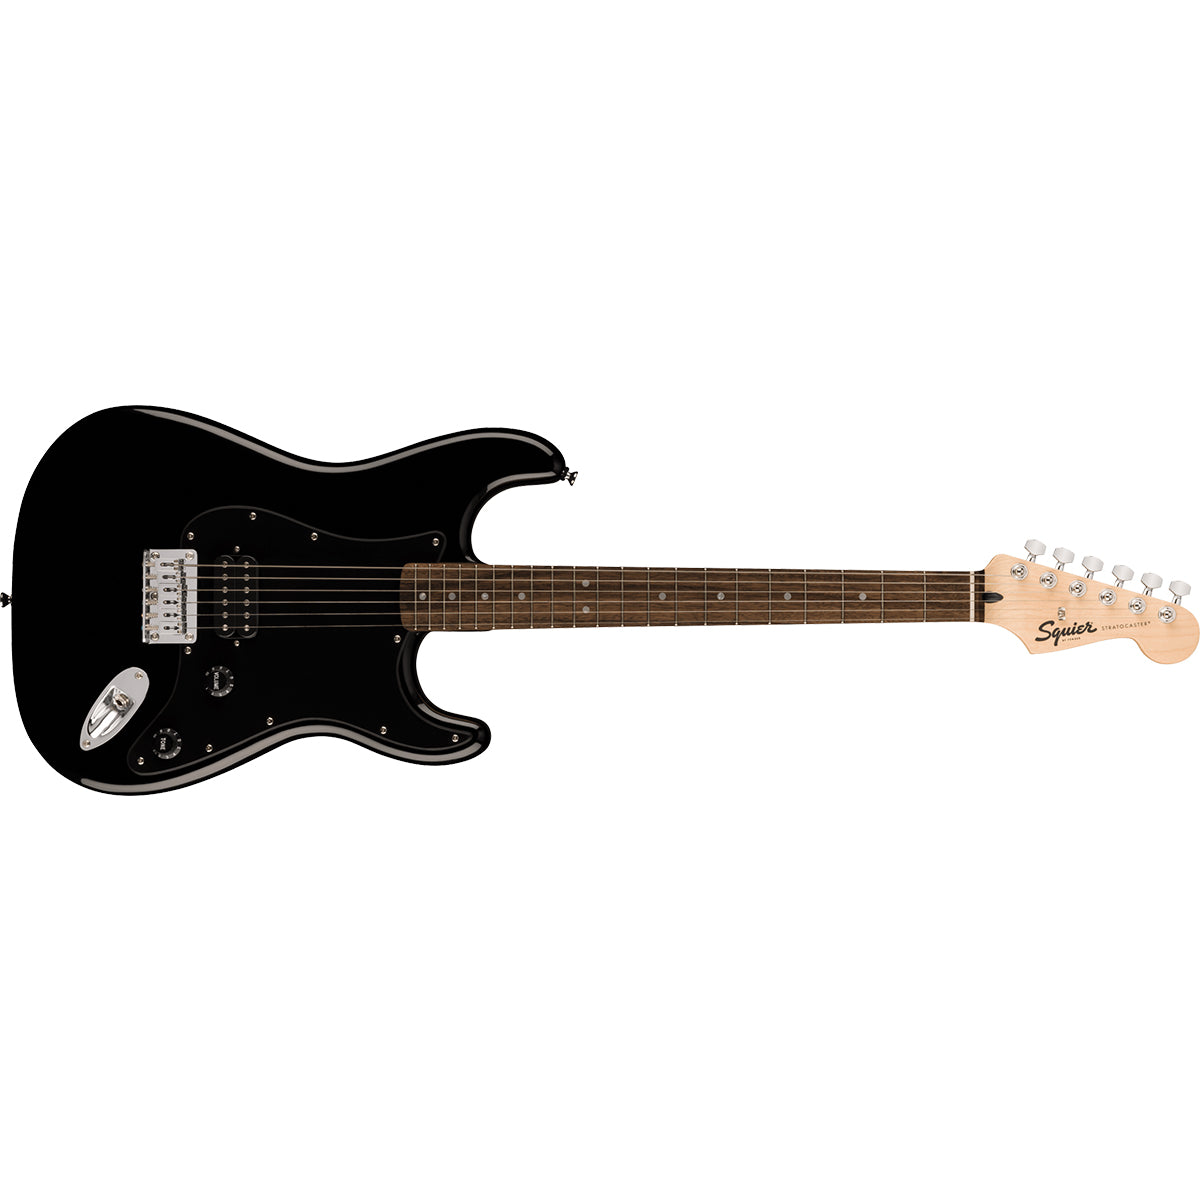 Fender Squier Sonic Stratocaster HT H Electric Guitar Black - 0373301506